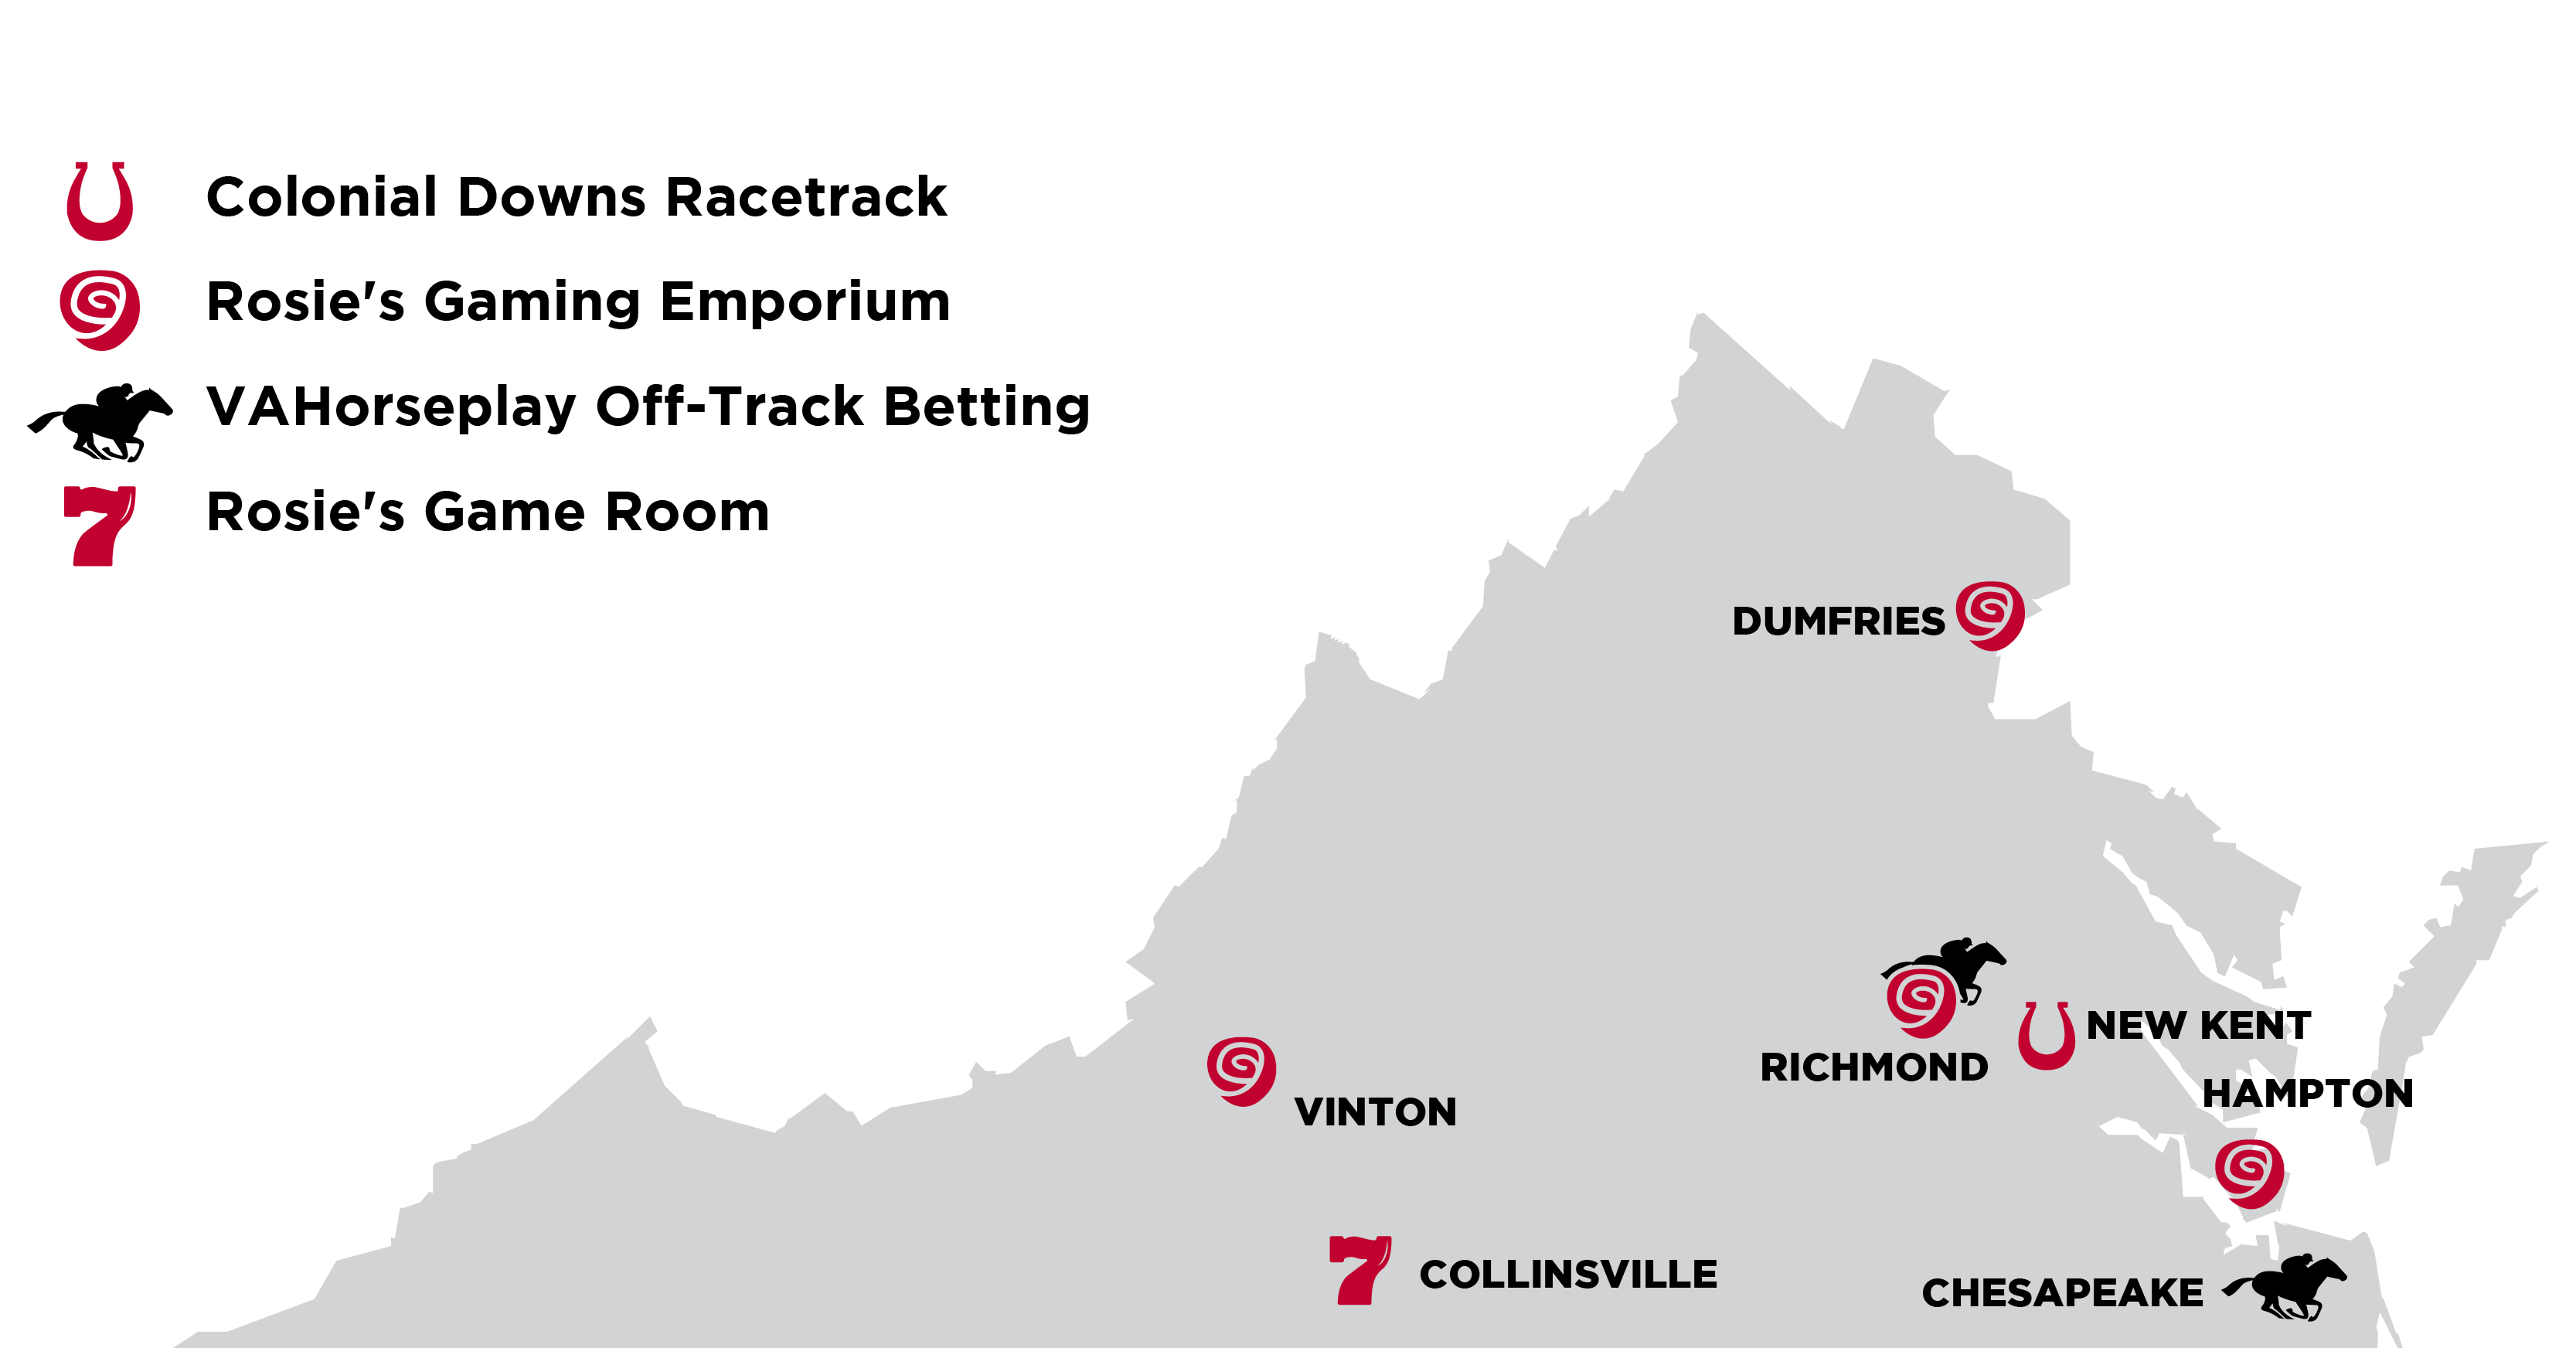 Map of Virginia that shows Rosie's and Off Track Betting locations